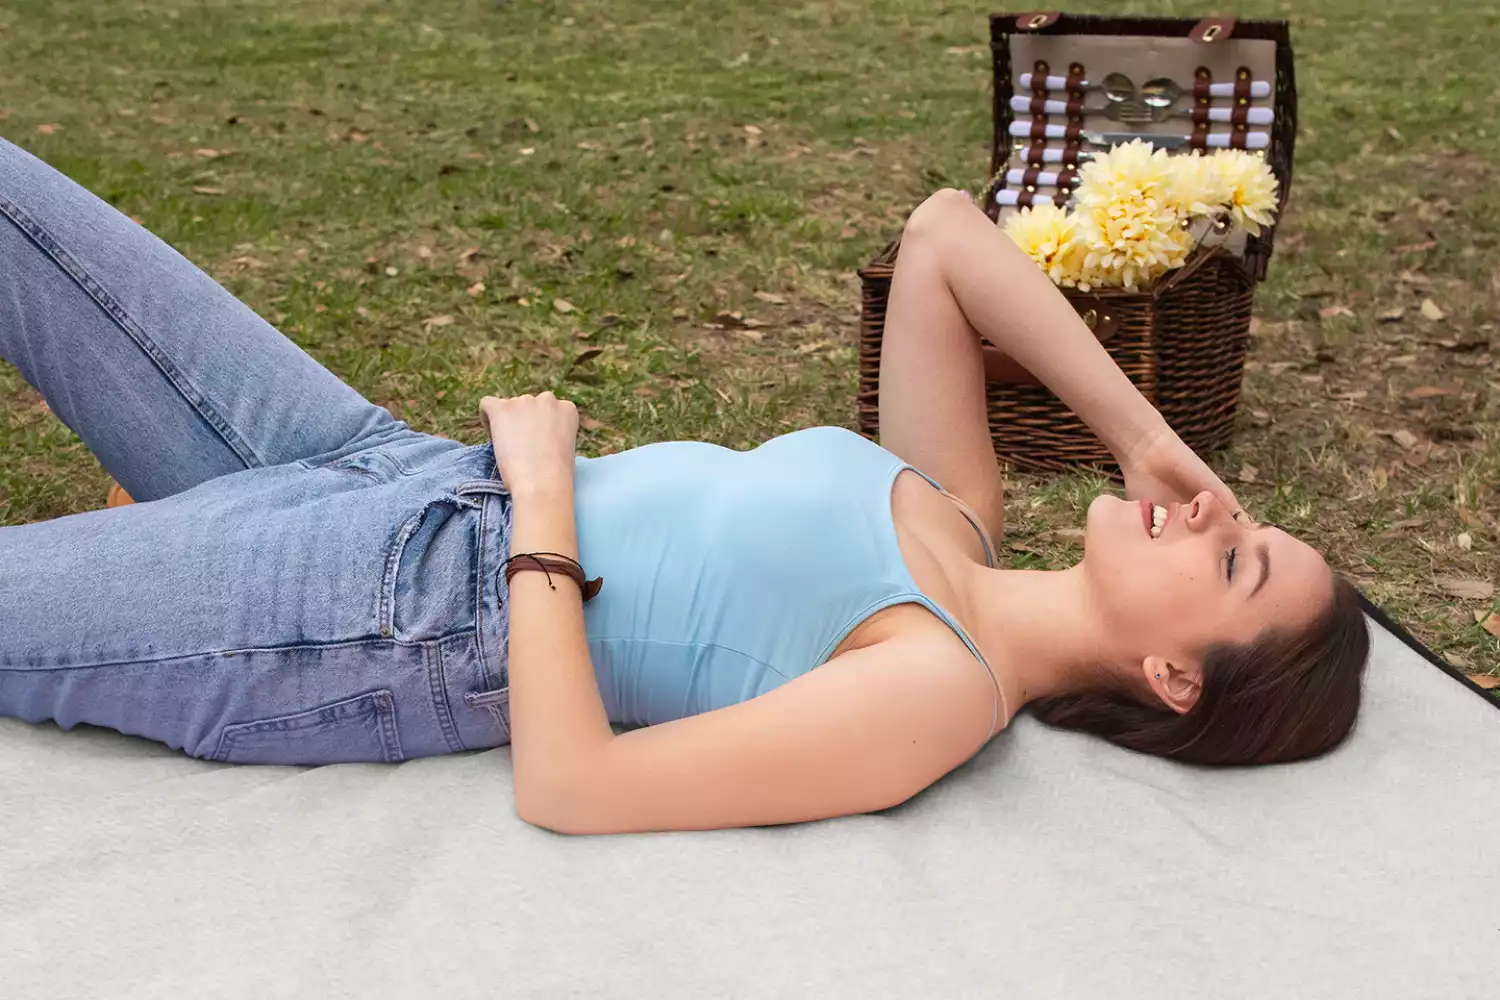 most comfortable picnic blanket